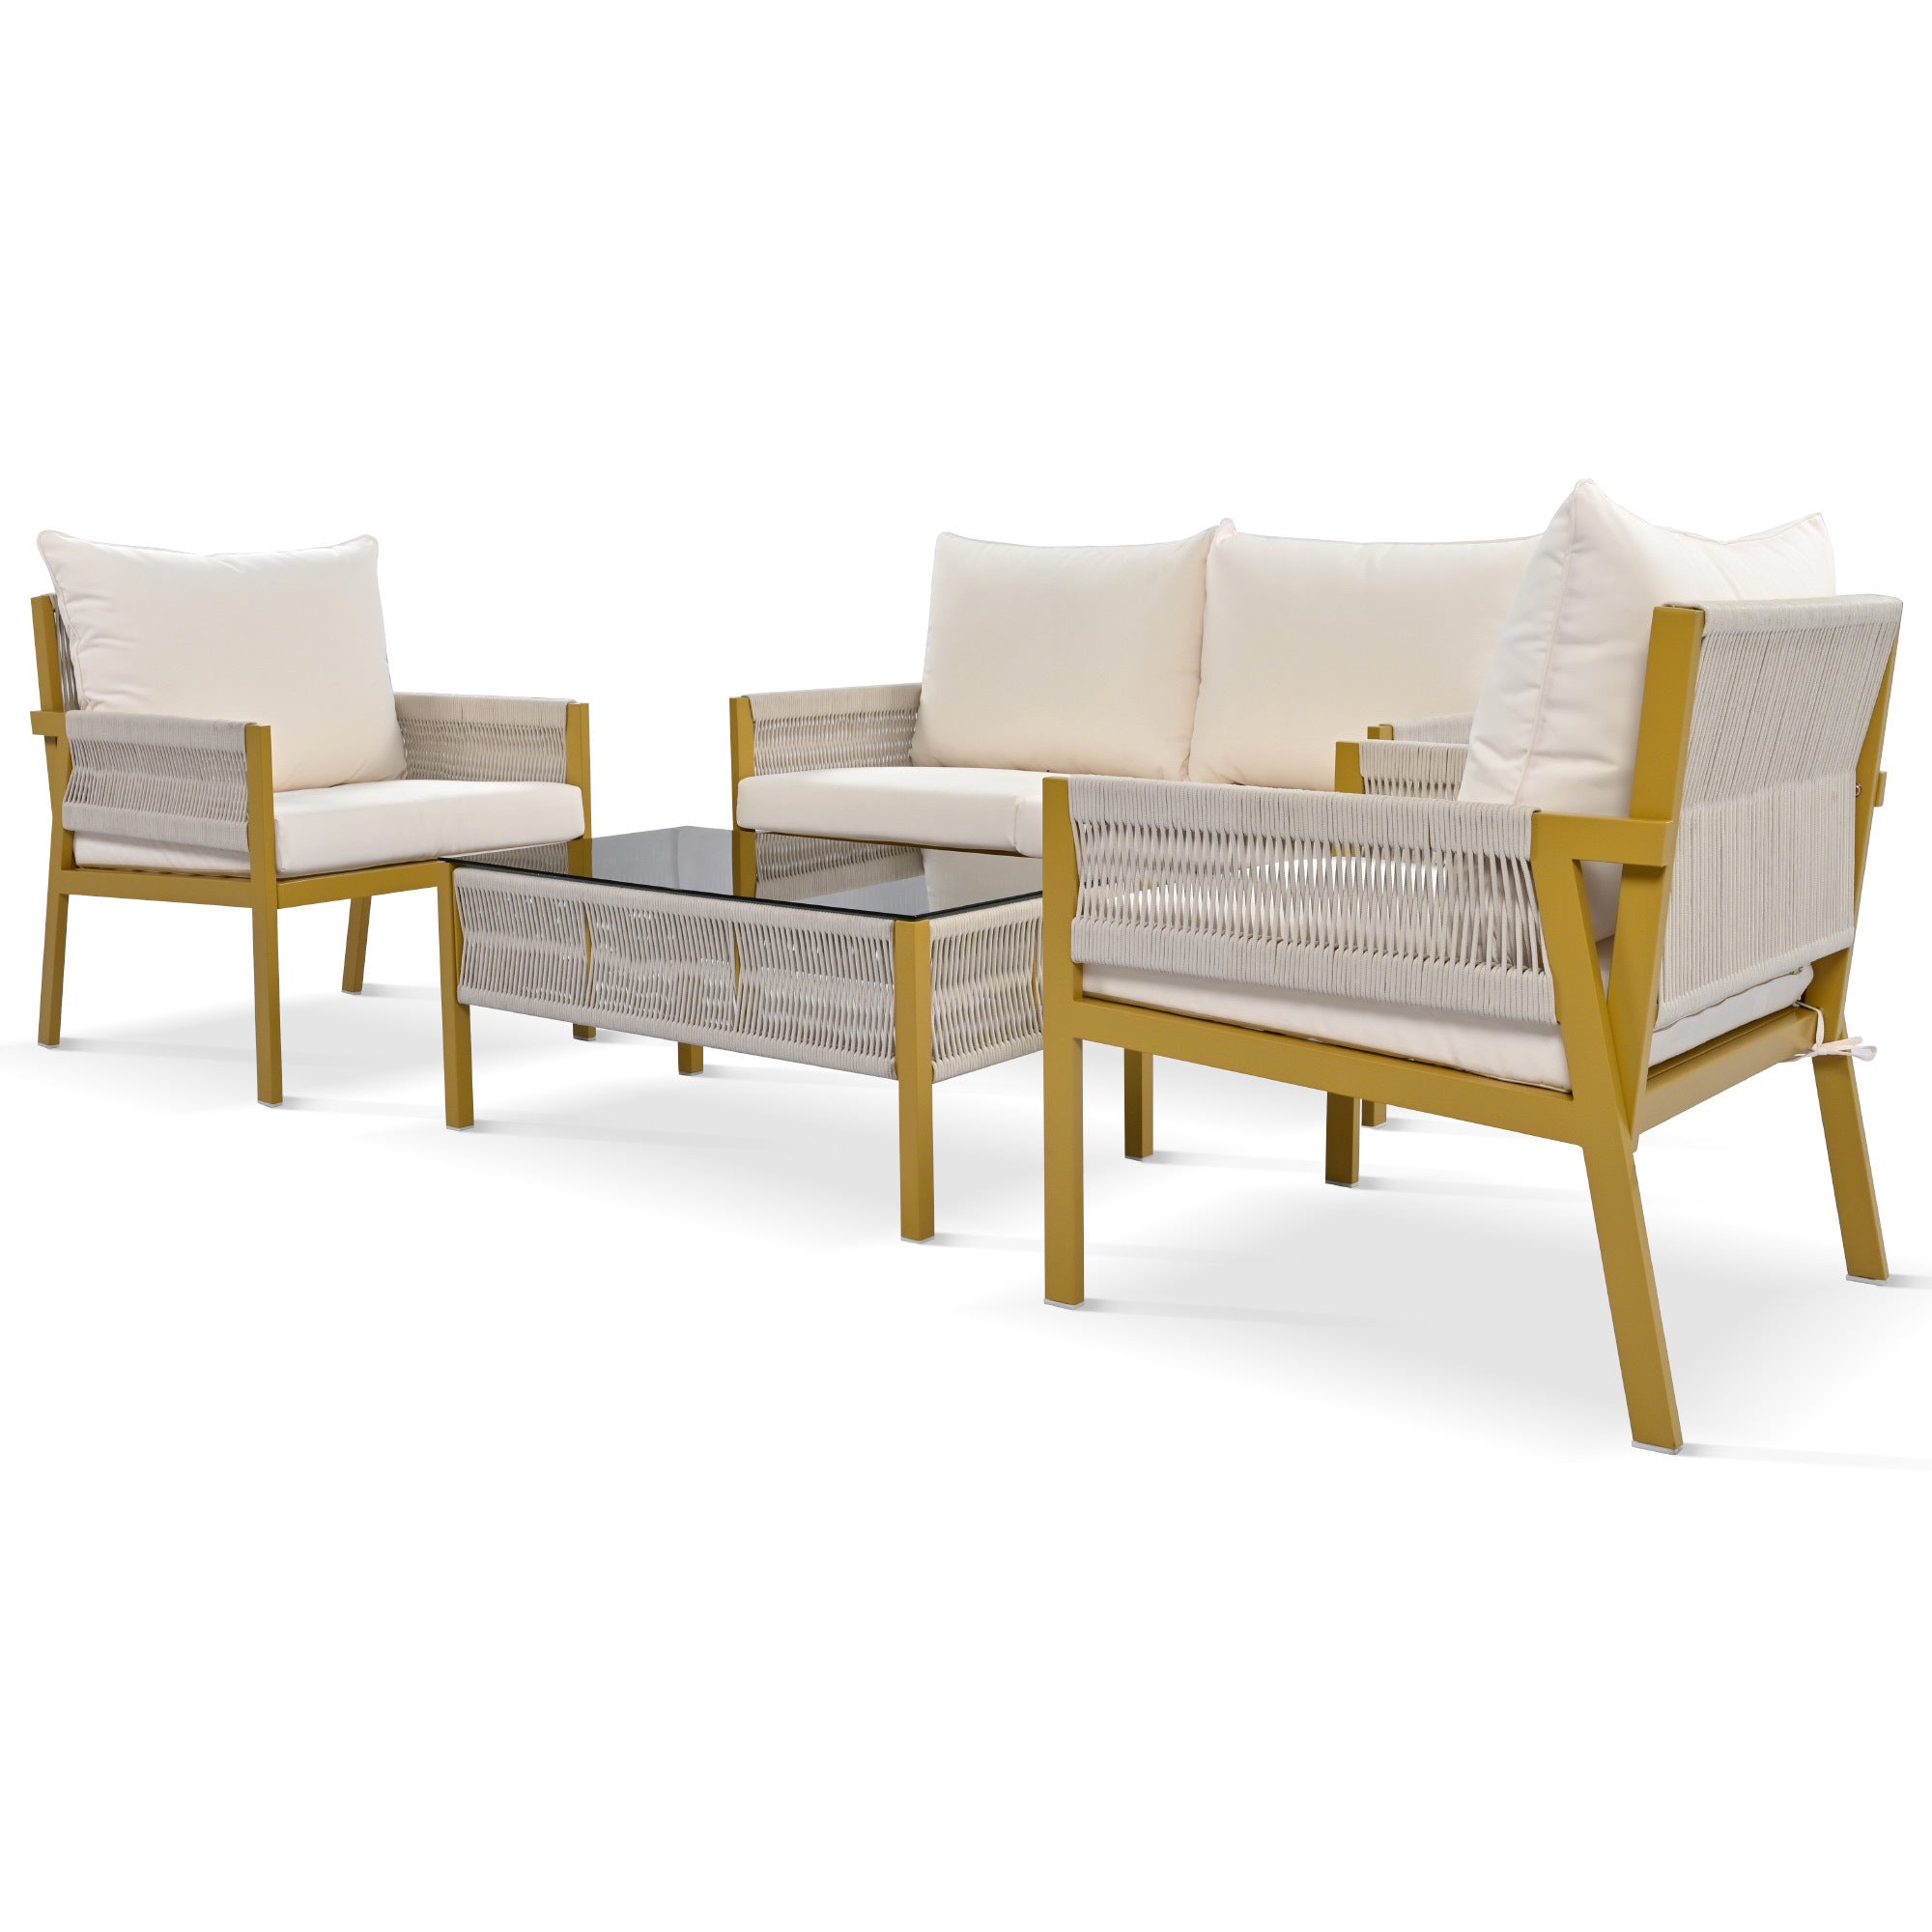 K&K 4-Piece Rope Patio Furniture Set, Outdoor Furniture with Tempered Glass Table, Patio Conversation Set Deep Seating with Thick Cushion for Backyard Porch Balcony (Beige&Mustard Yellow)